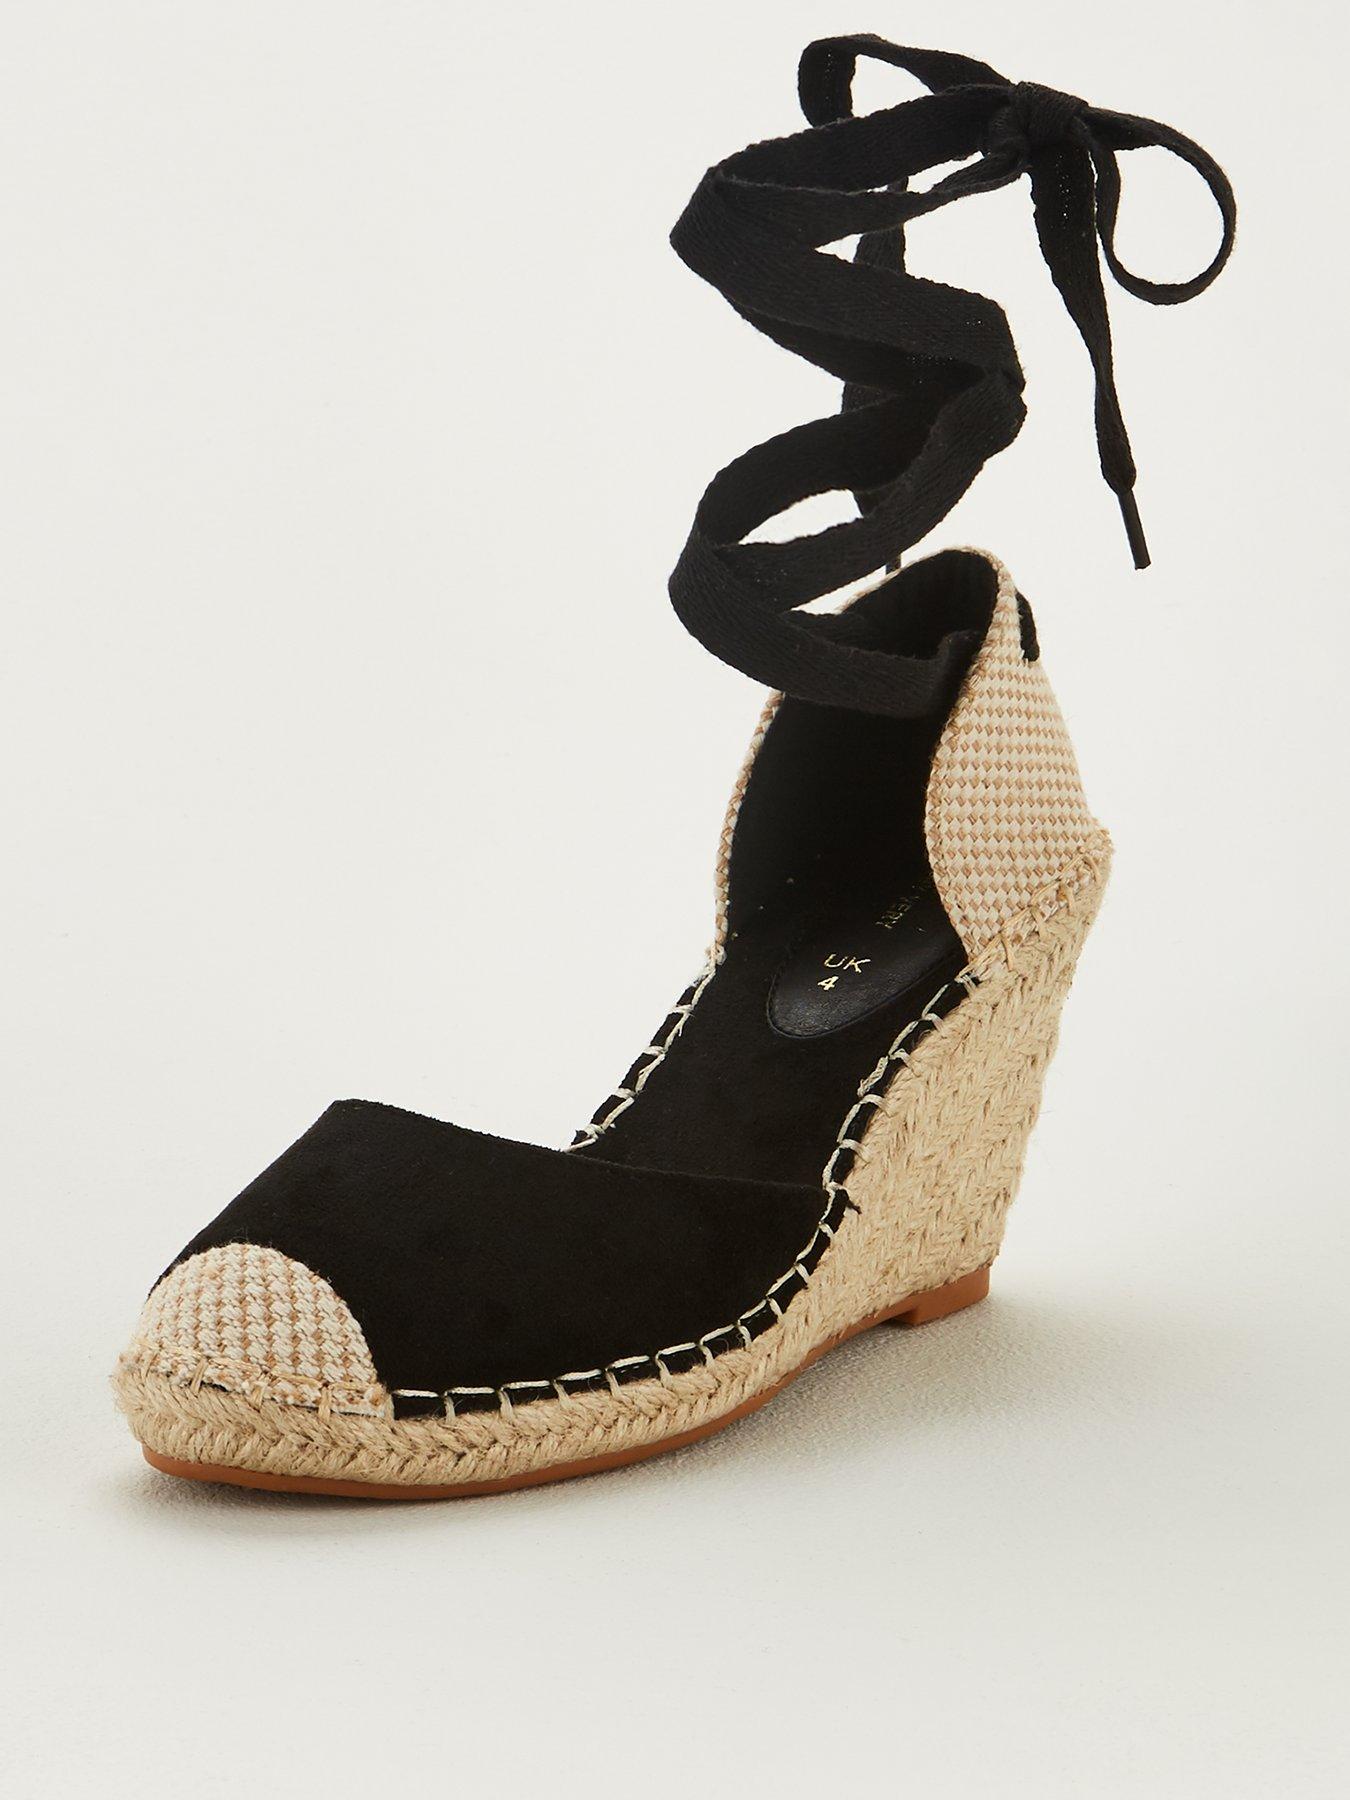 Wedge Sandals | Women's Shoes 